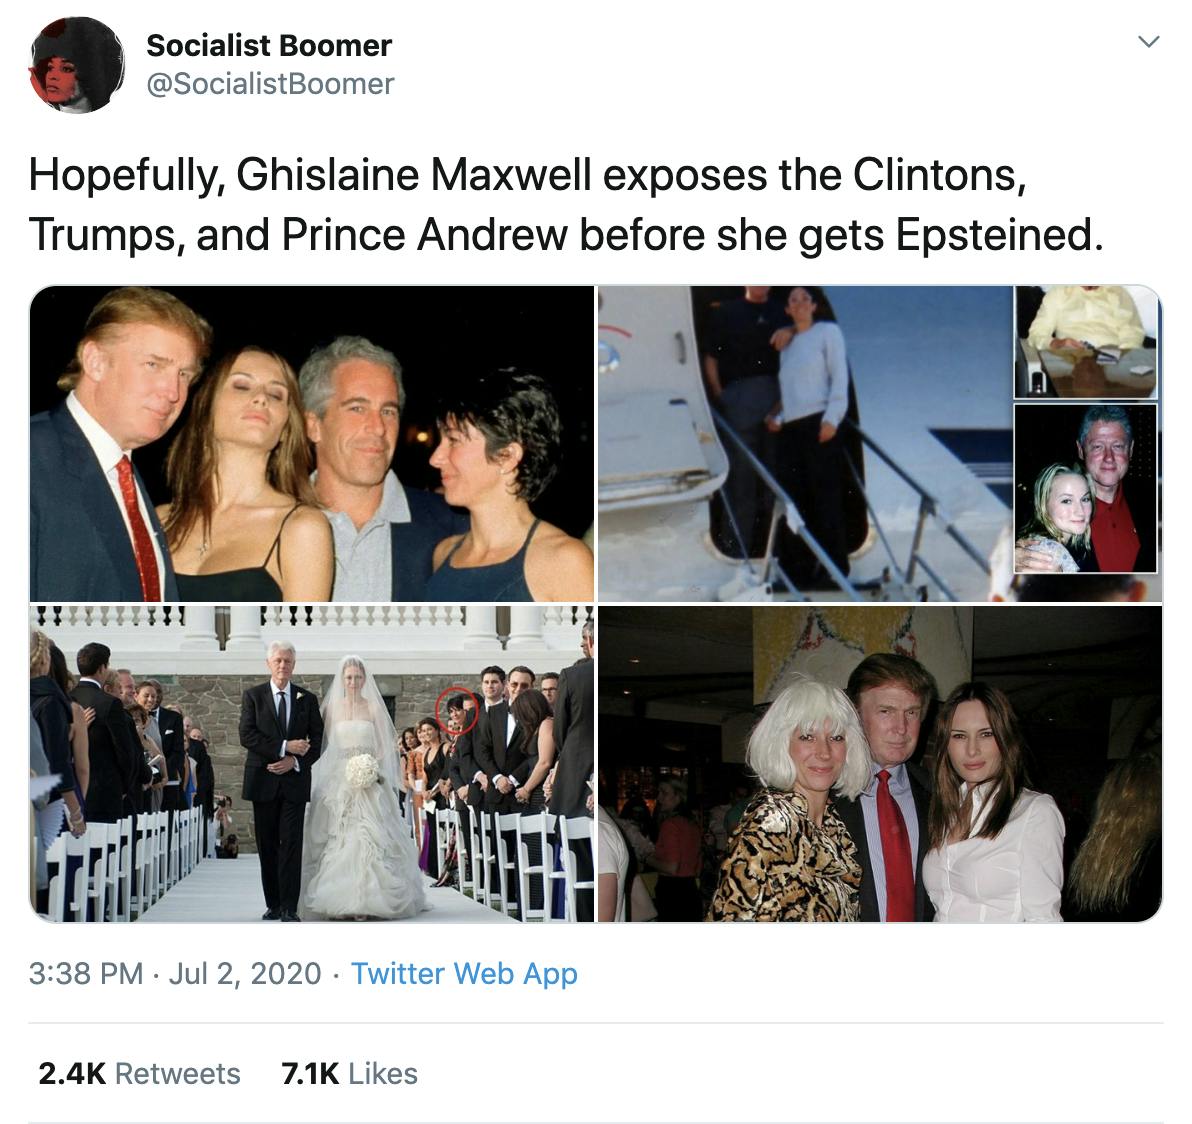 "Hopefully, Ghislaine Maxwell exposes the Clintons, Trumps, and Prince Andrew before she gets Epsteined." pictures of Maxwell with them